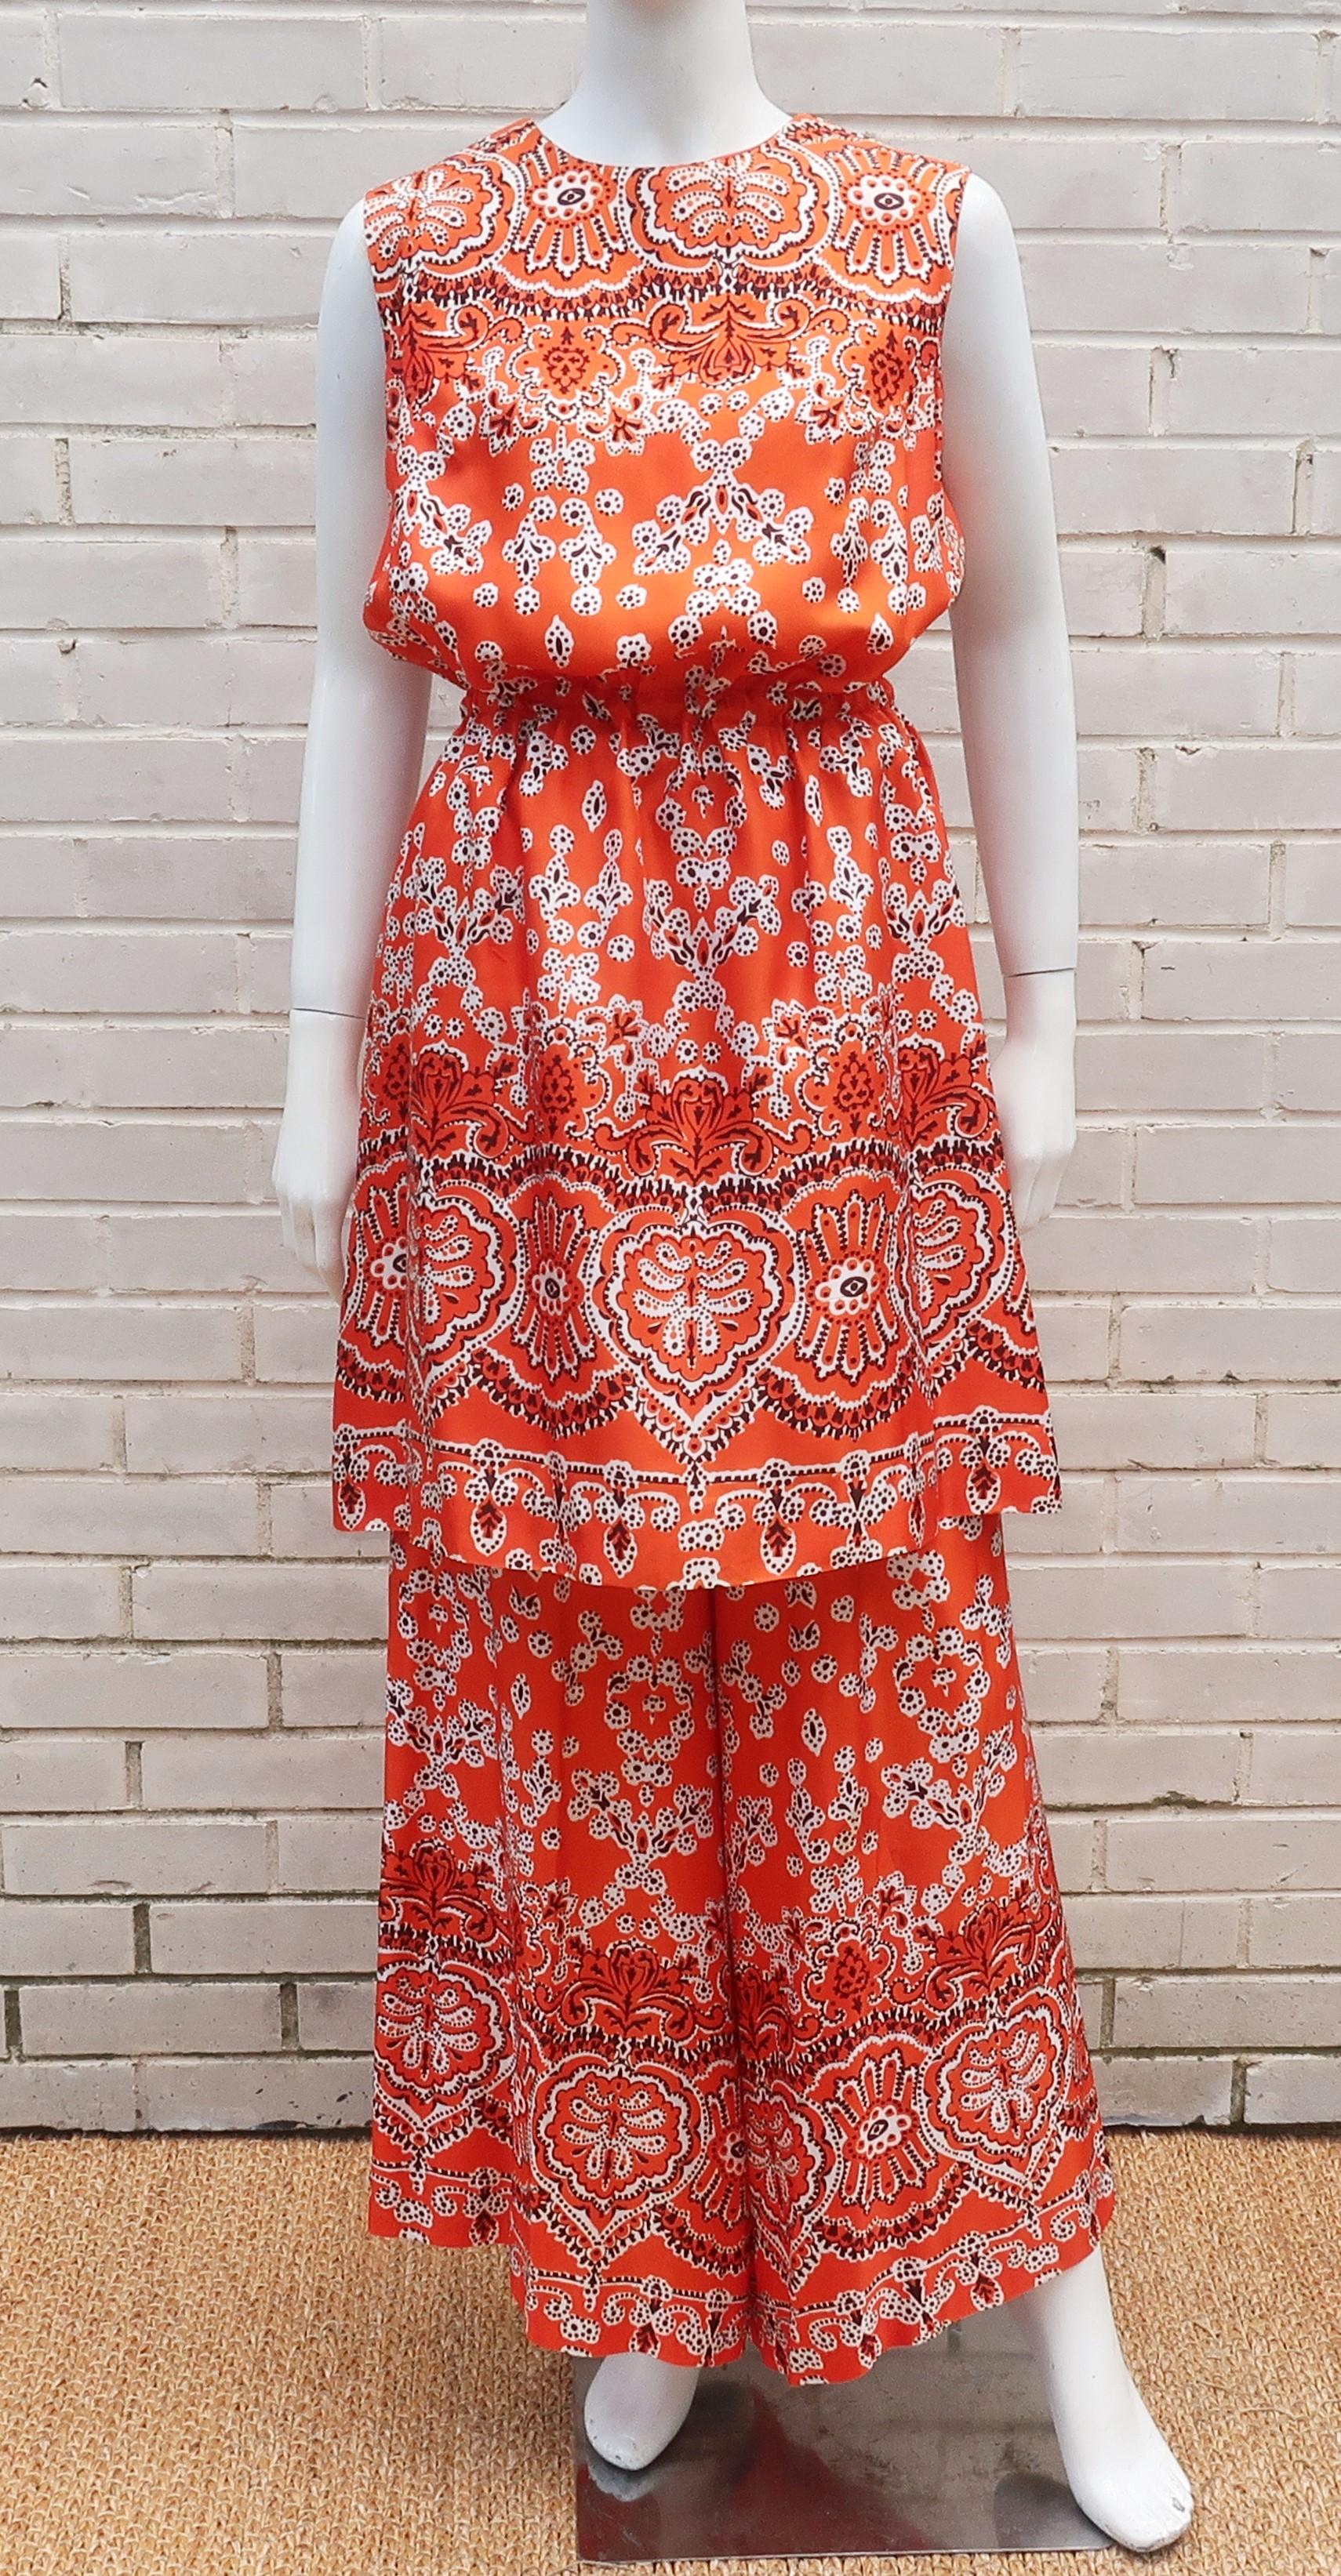 C.1970 Saks Fifth Avenue two piece pant suit in an orange red mod print with black and white highlights.  The two pieces consist of a tunic style top that can also be worn as a dress and pull-on palazzo pants.  Though there is no contents label, the